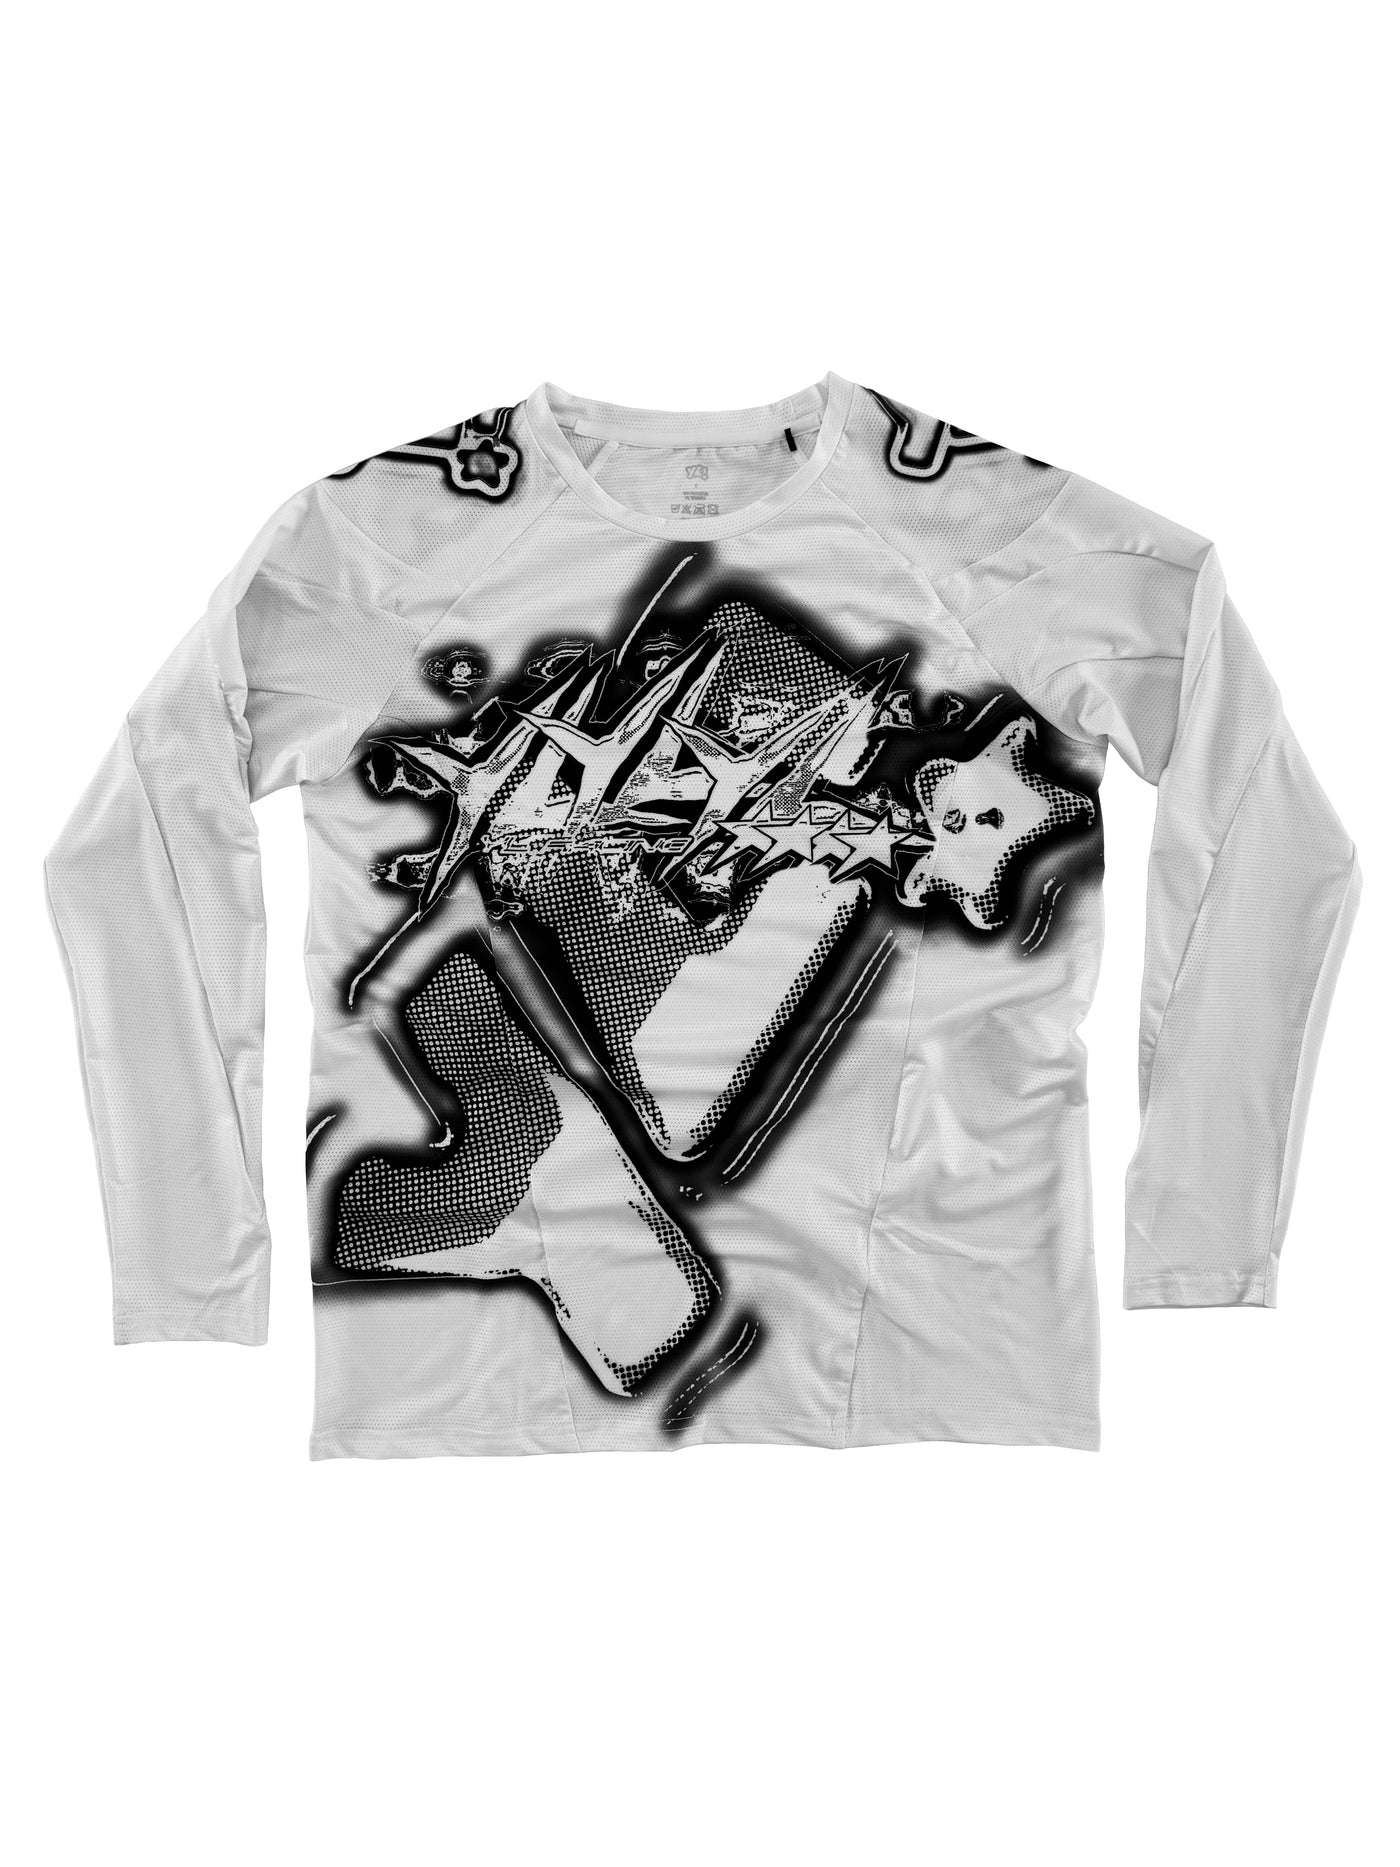 YL Racer Jersey - White